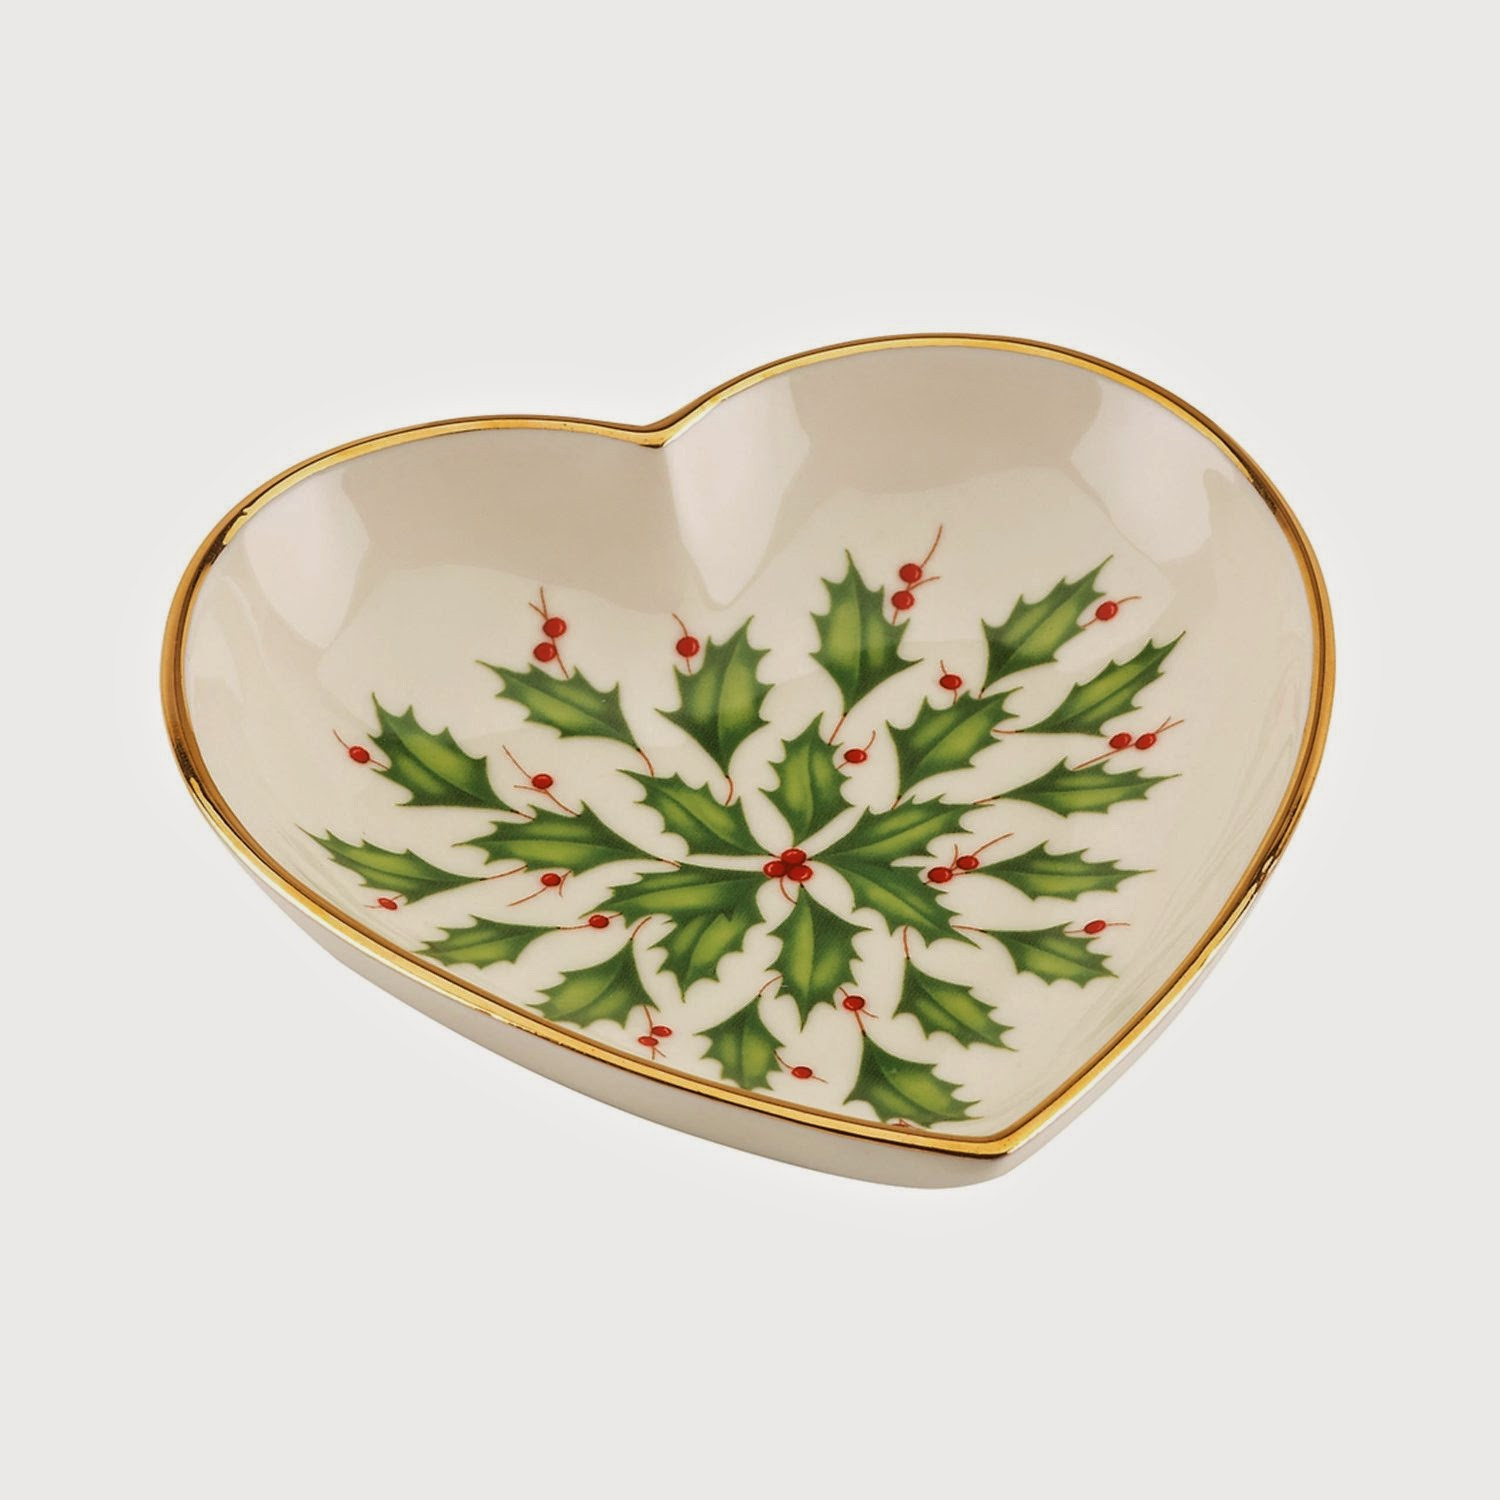 Lenox Christmas Candy Dish
 The Things of Life Lenox Christmas Candy Dishes